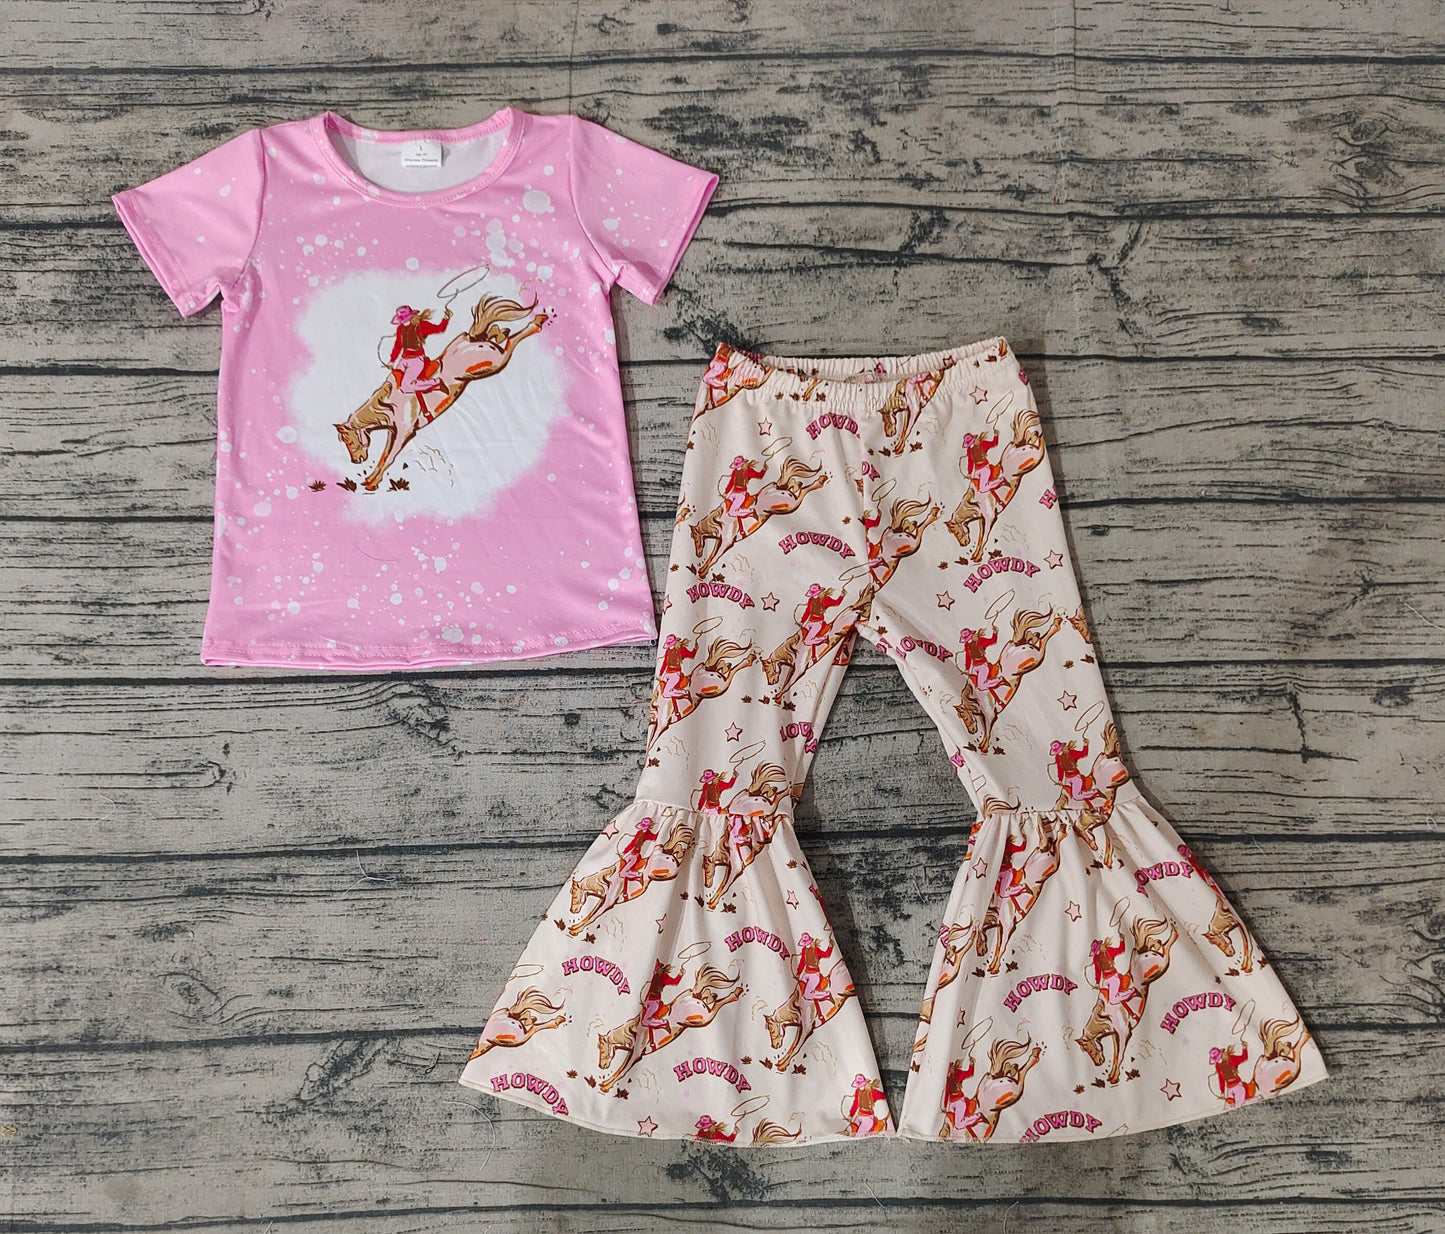 Baby Girls Rodeo Horse Shirt Bell Pants Western Outfits Clothes Sets